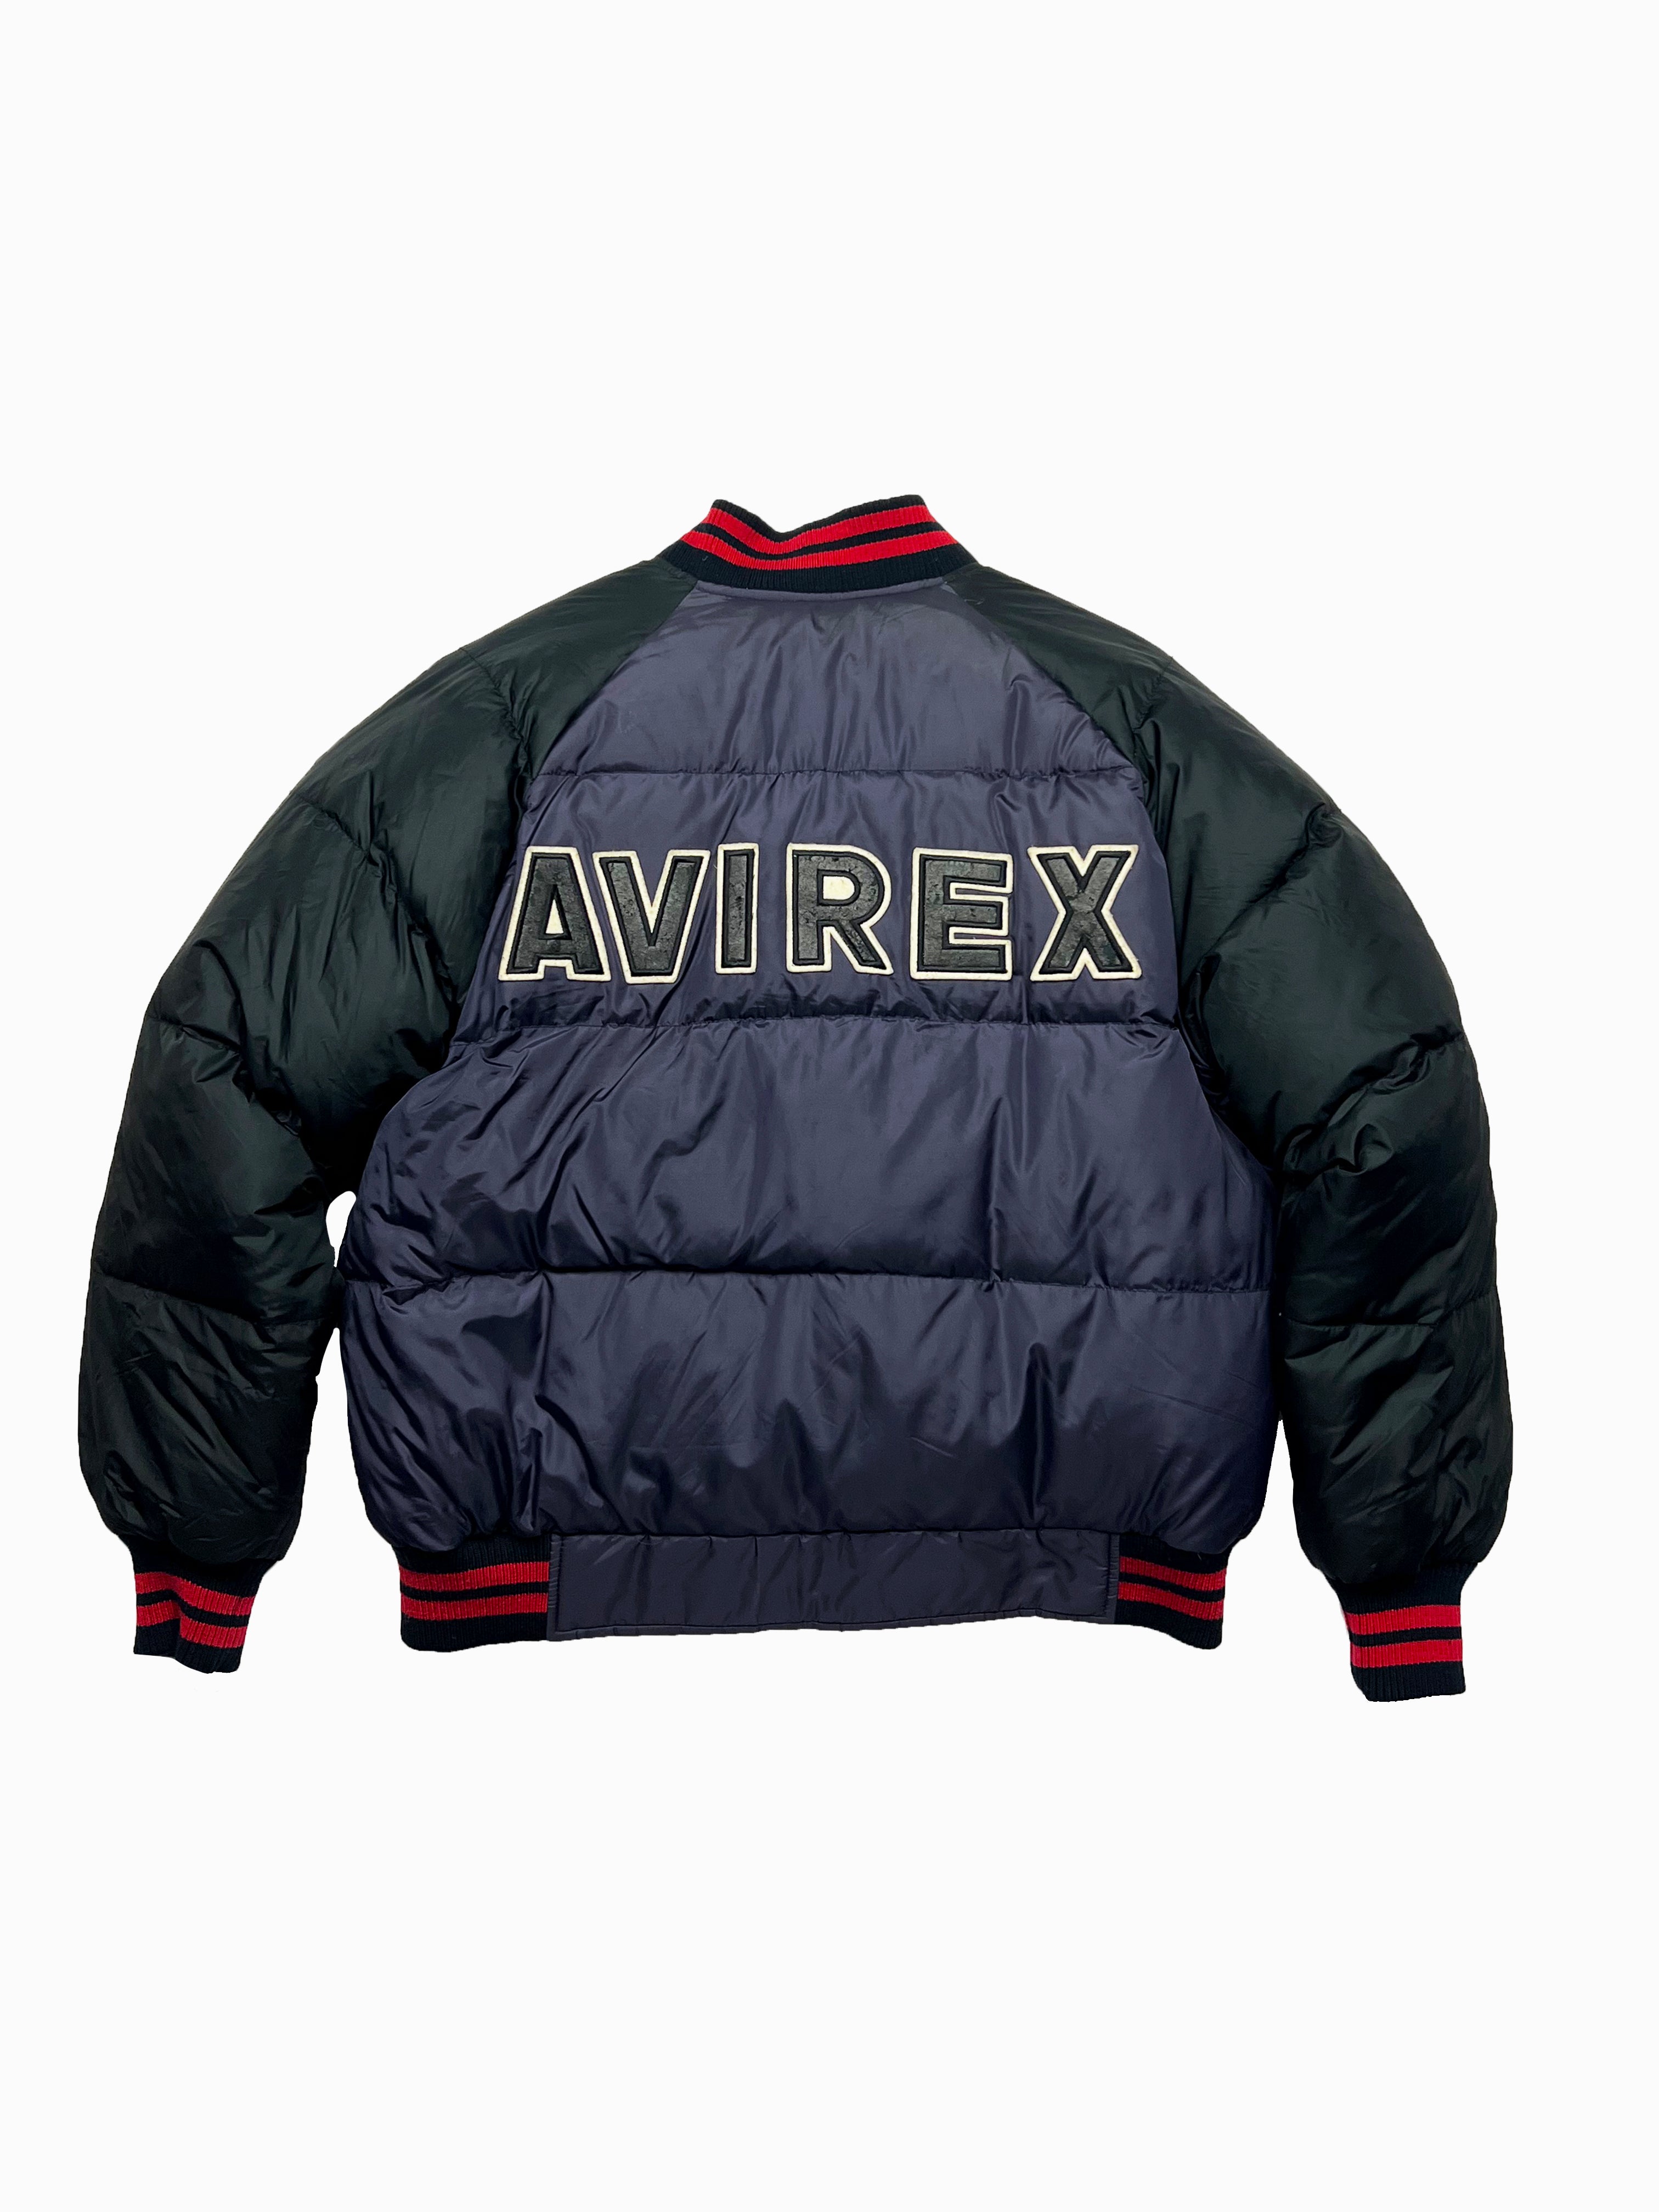 Avirex Reversible Spell Out Puffer Jacket 90's